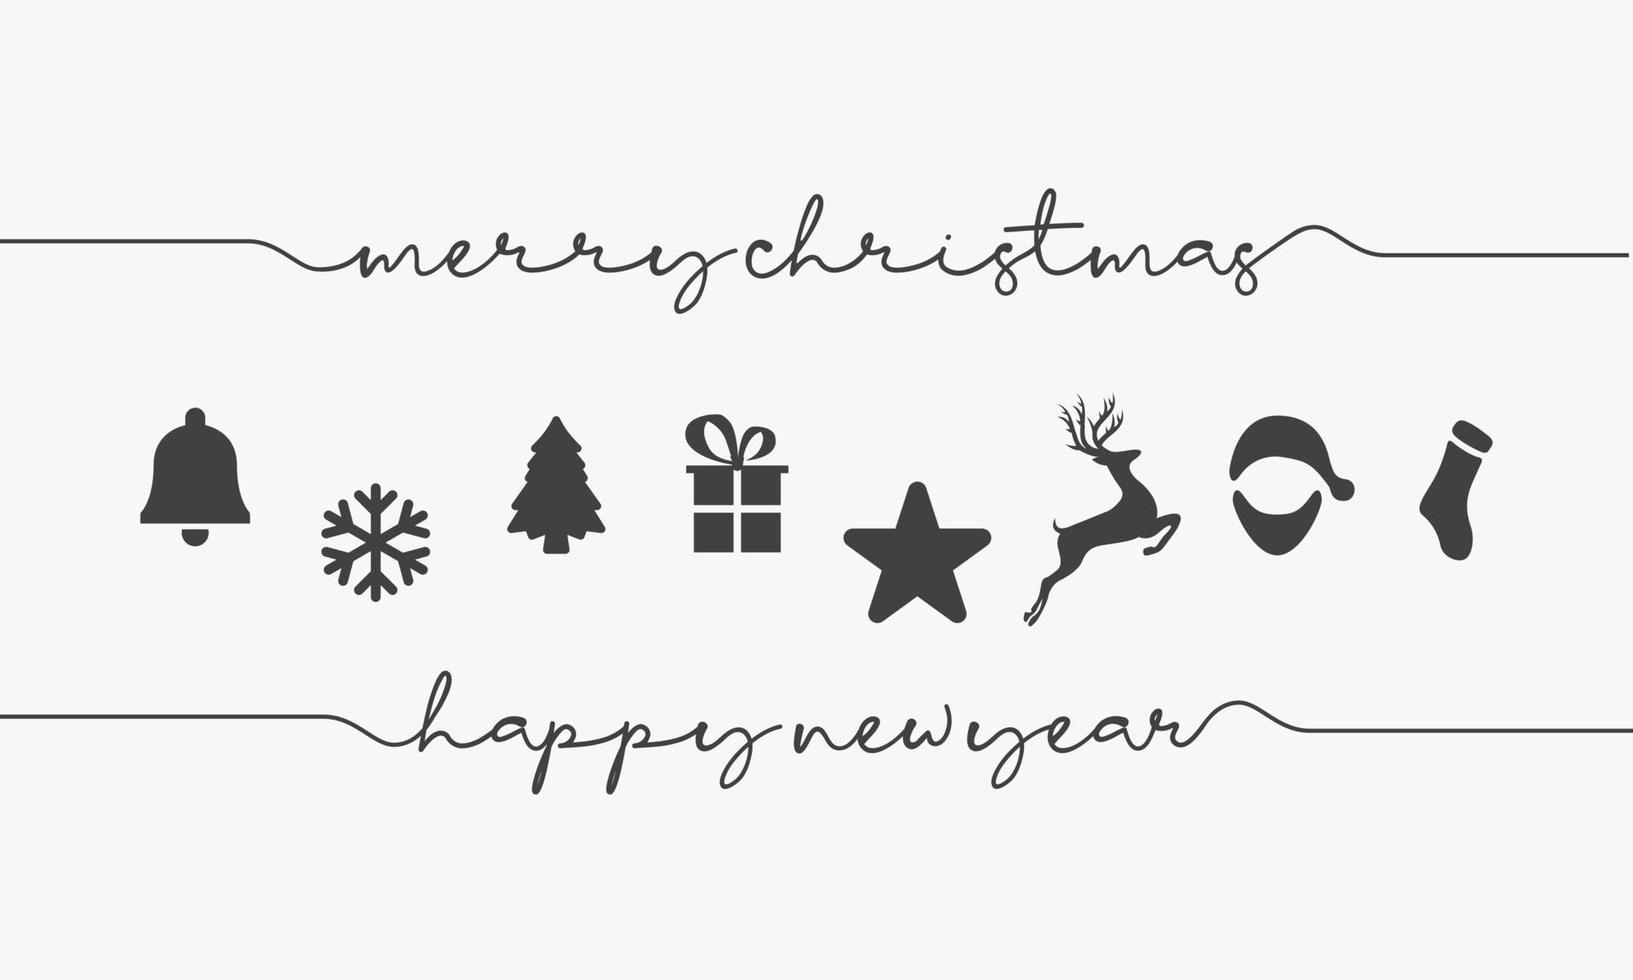 ornament background with text merry christmas happy new year. vector